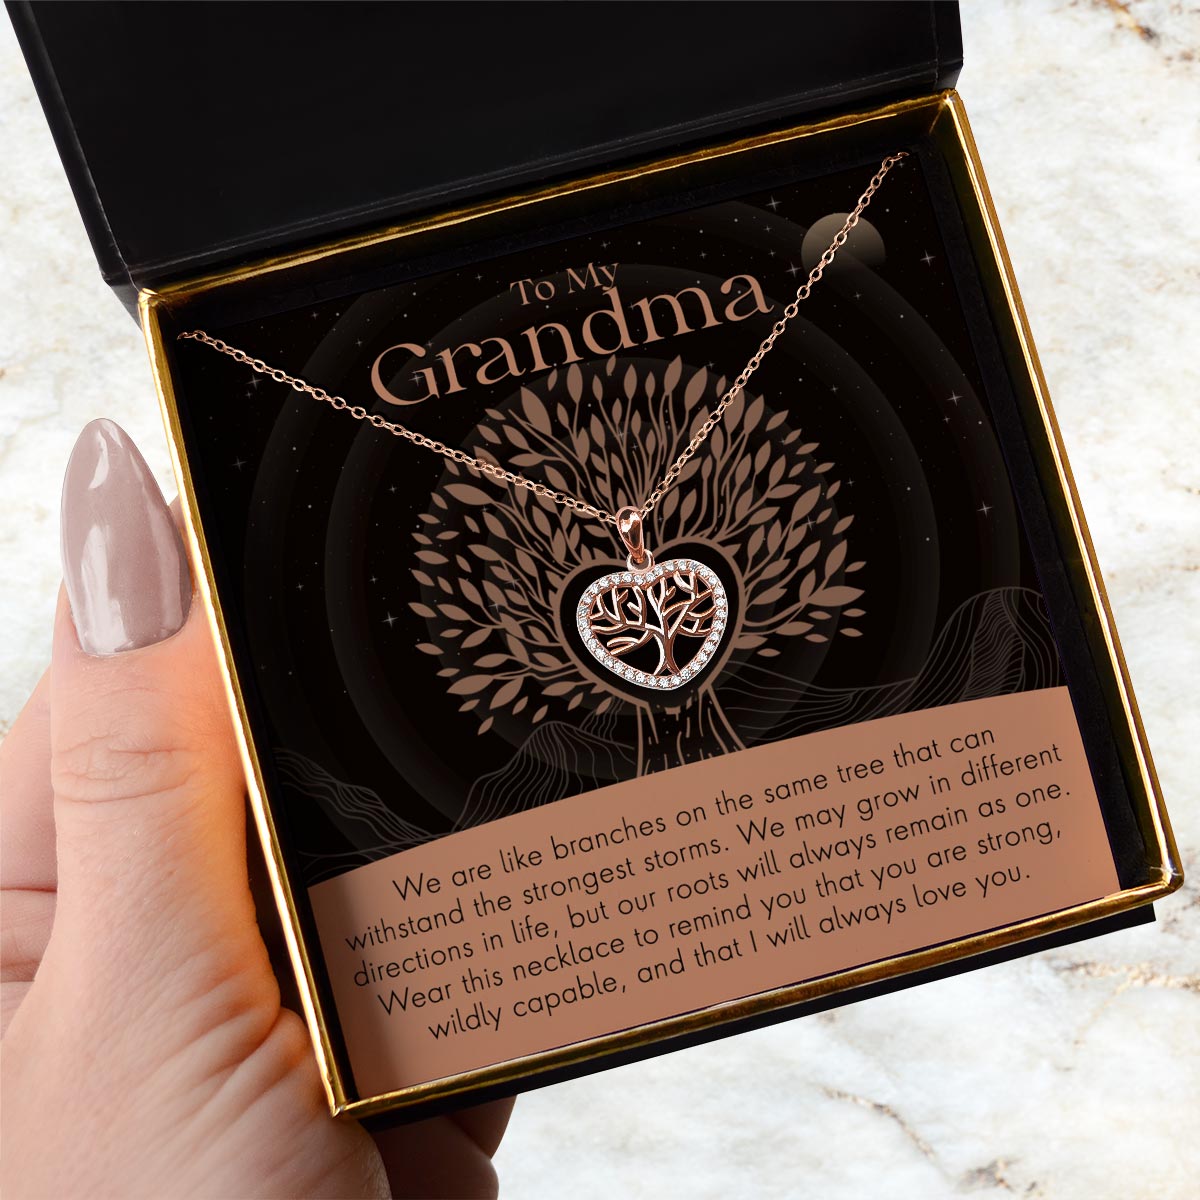 To My Grandma - Strong Roots - Tree of Life Mini Heart Pendant Necklace Gift Set